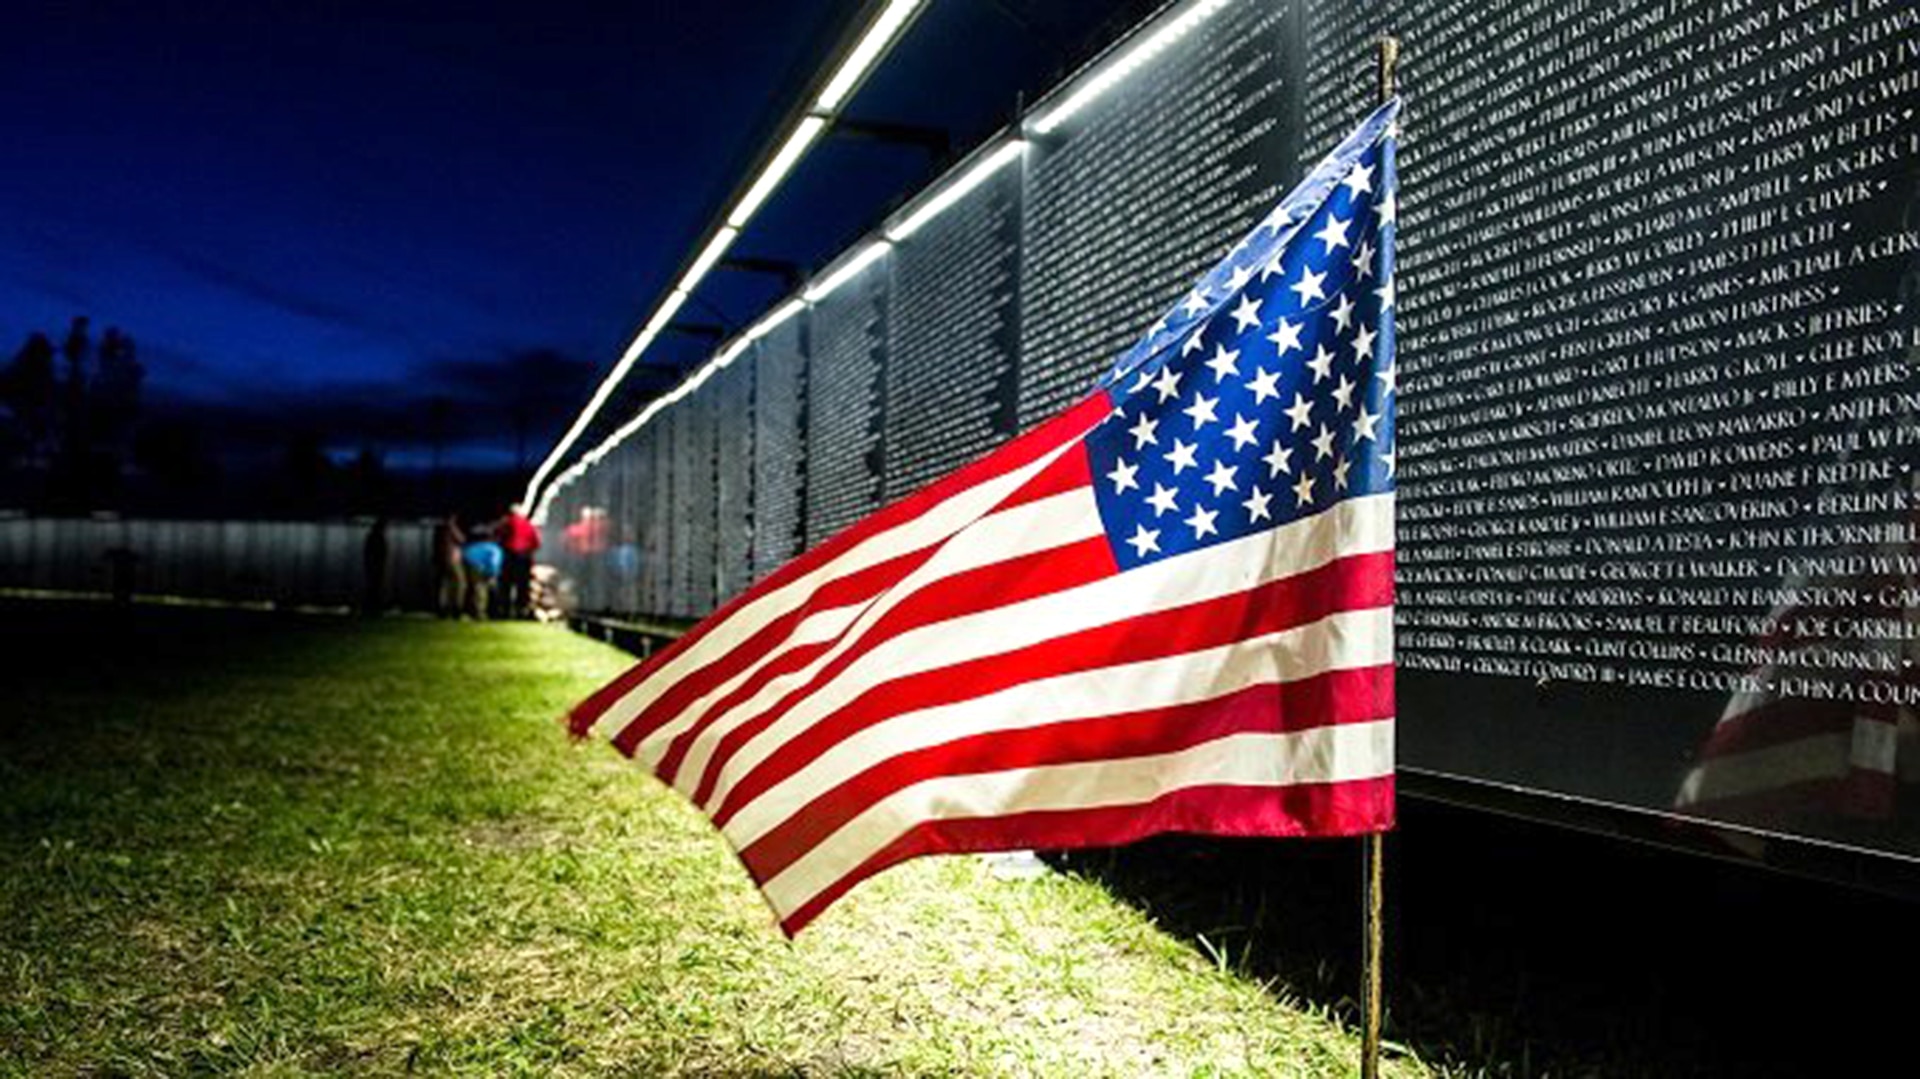 Like the original memorial, “The Wall That Heals” is erected in a chevron shape and visitors can do name rubbings of individual service member's names. The replica is constructed of Avonite, a synthetic granite, and its 140 numbered panels are supported by an aluminum frame. Machine engraving of the more than 58,000 names along with modern LED lighting provide readability day and night.